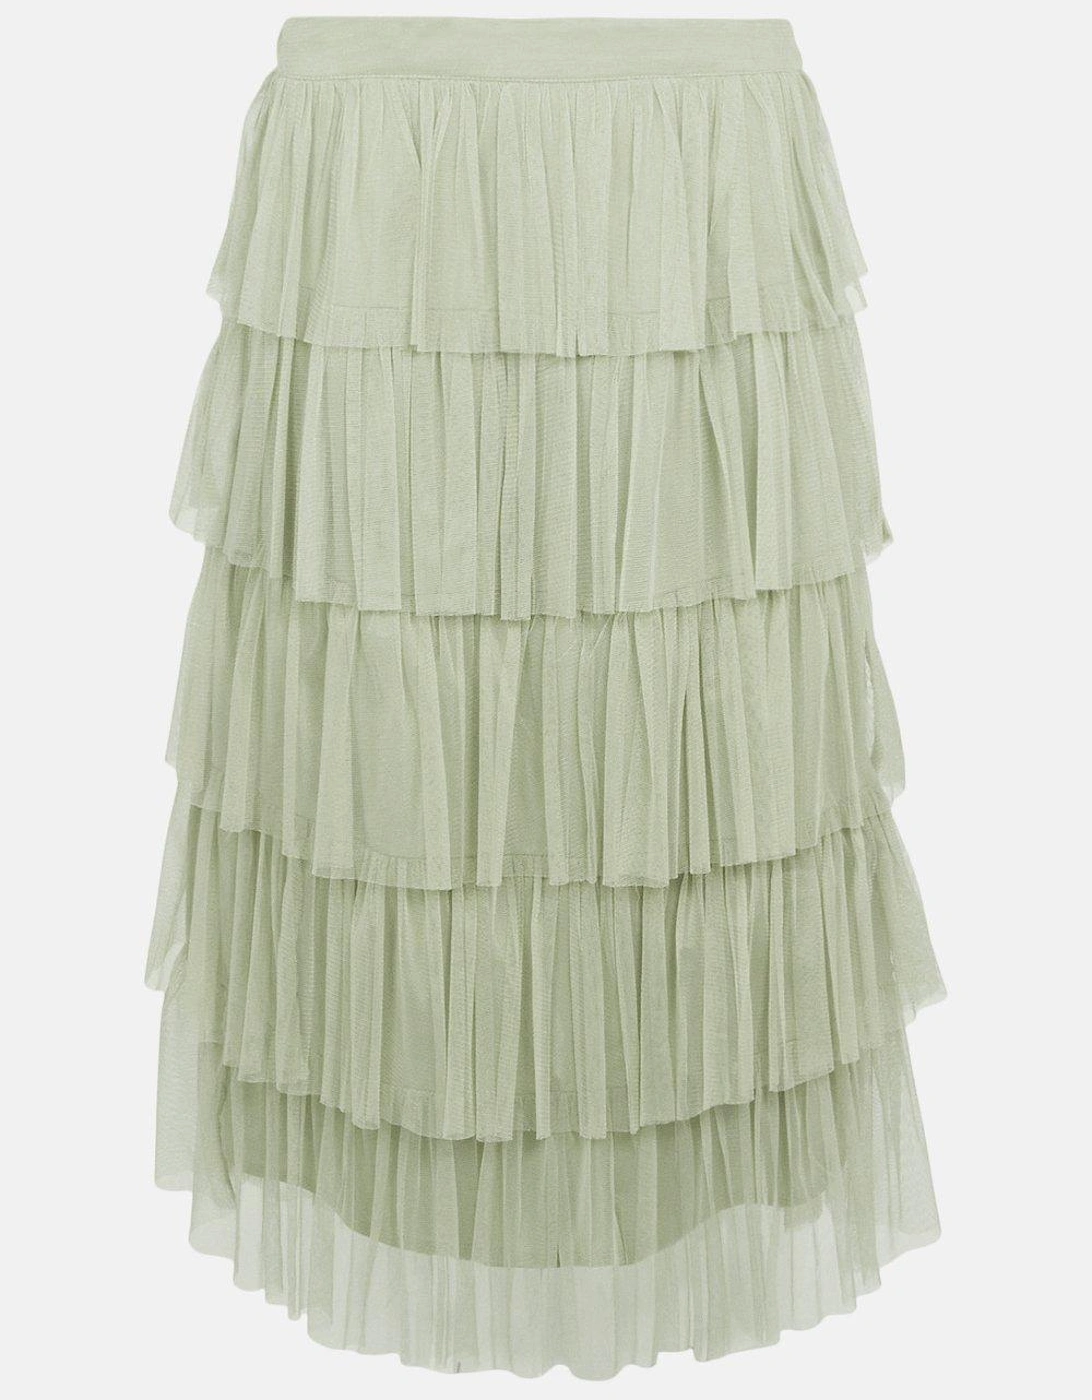 All Over Tiered Tulle Skirt